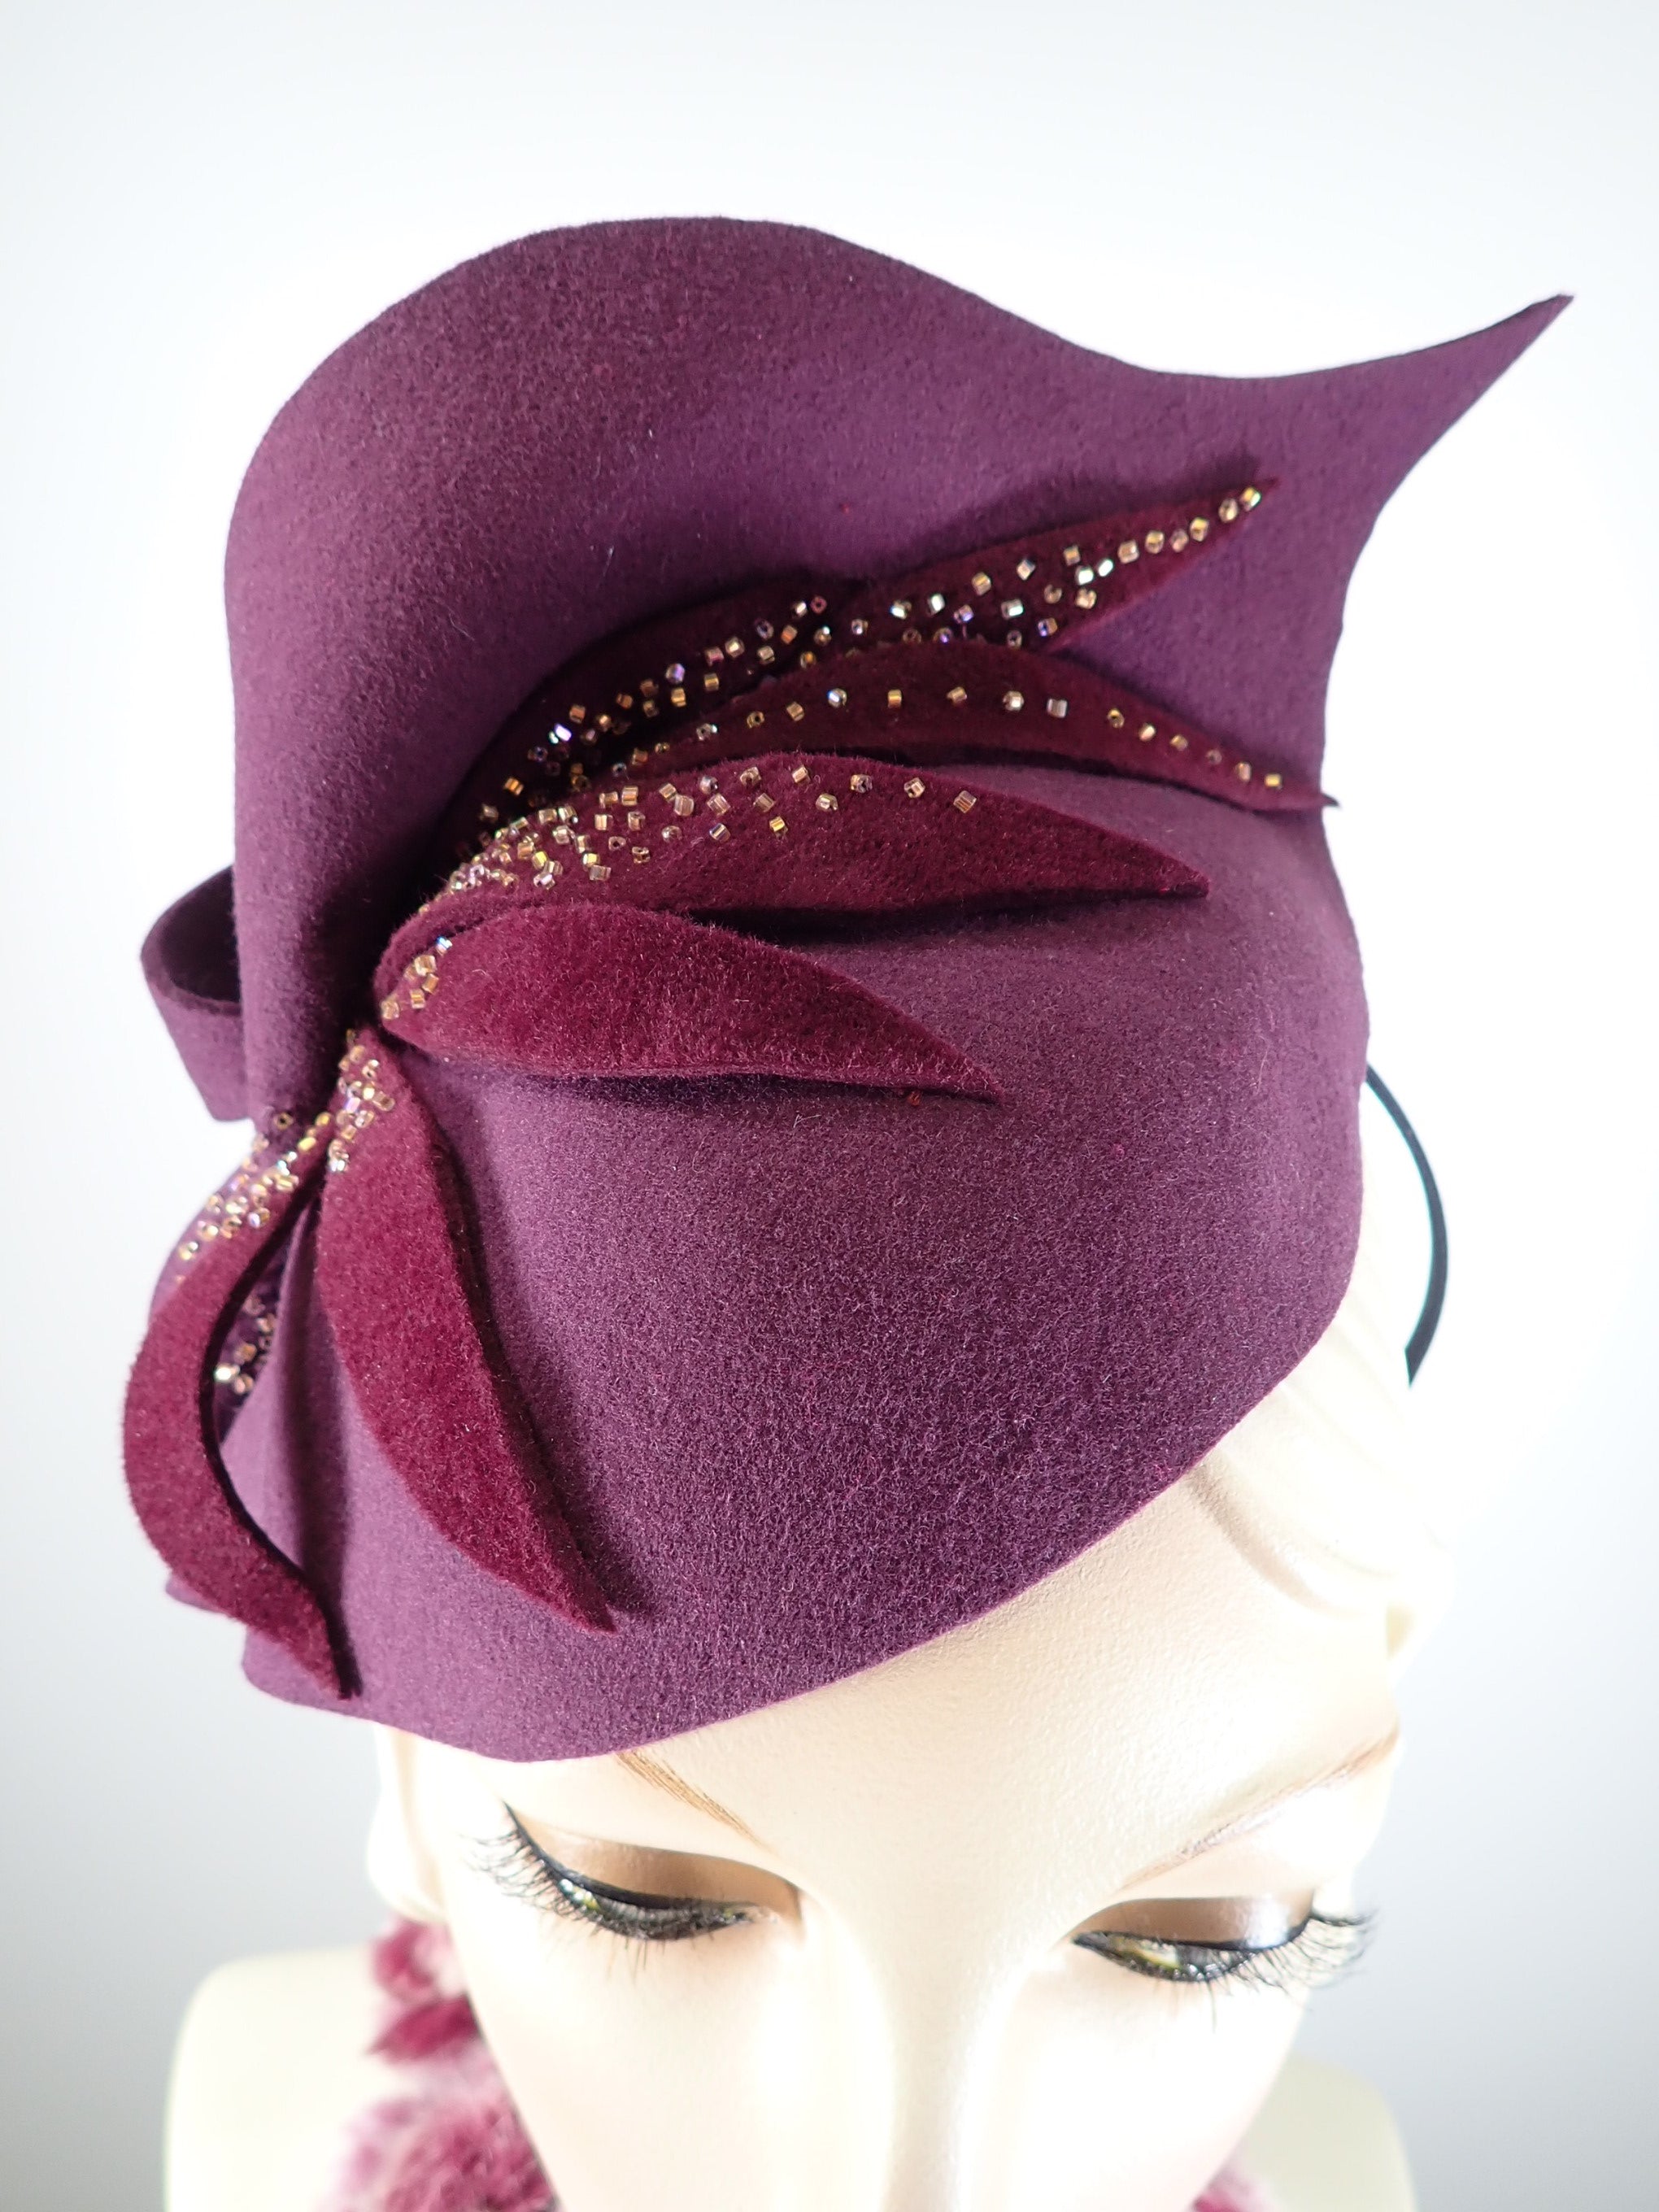 Burgundy Felt Free form Hand Sculpted Fascinator For Fall and Winter